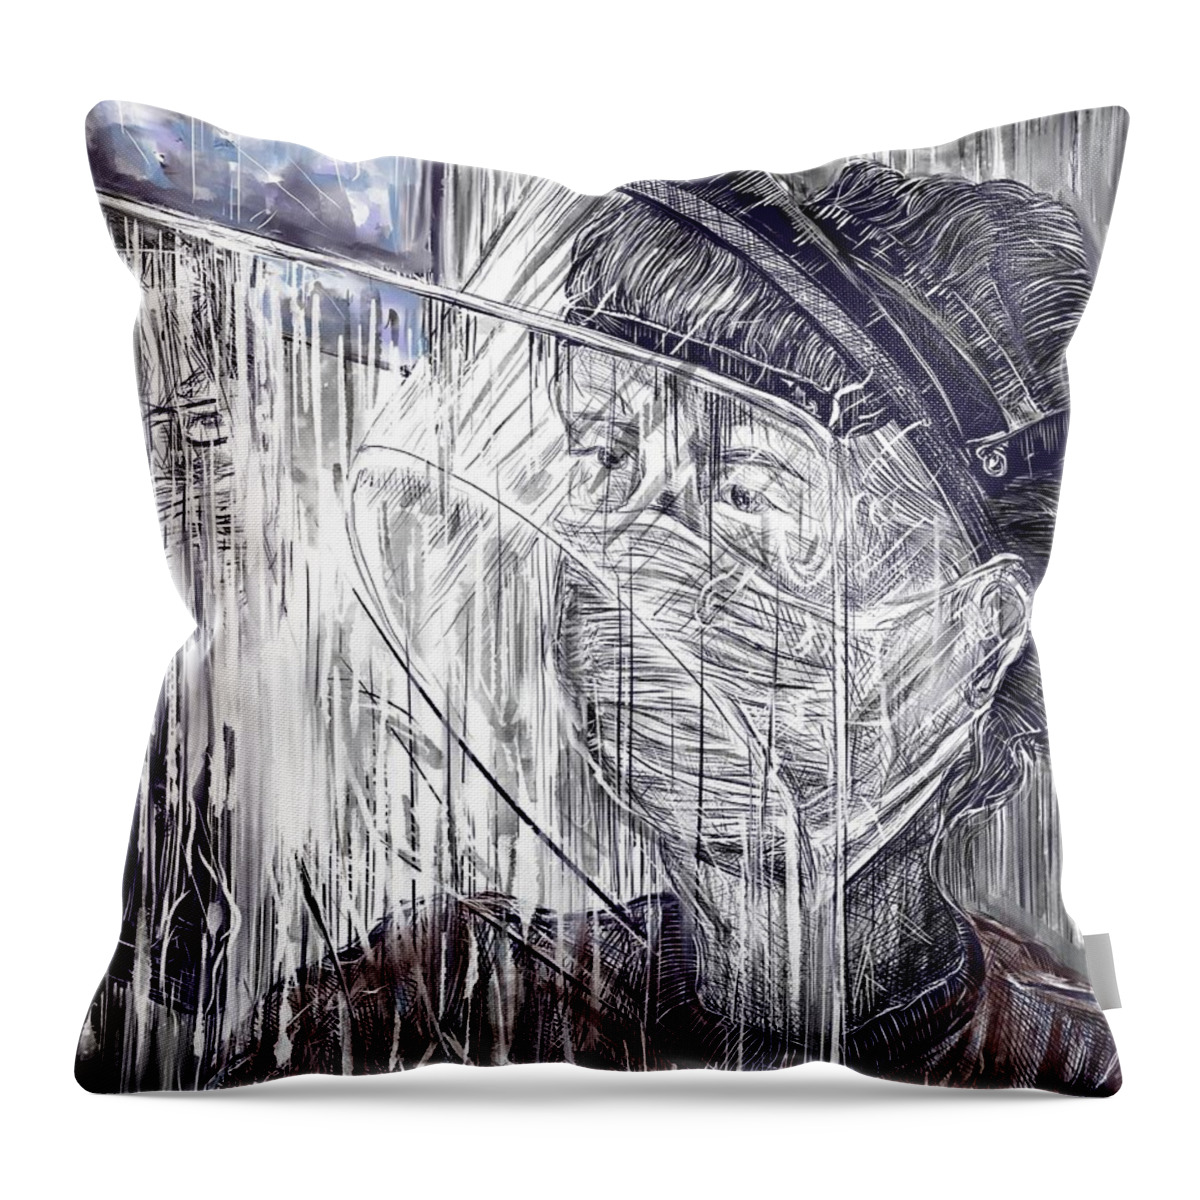 Reception Throw Pillow featuring the digital art Reception by Angela Weddle